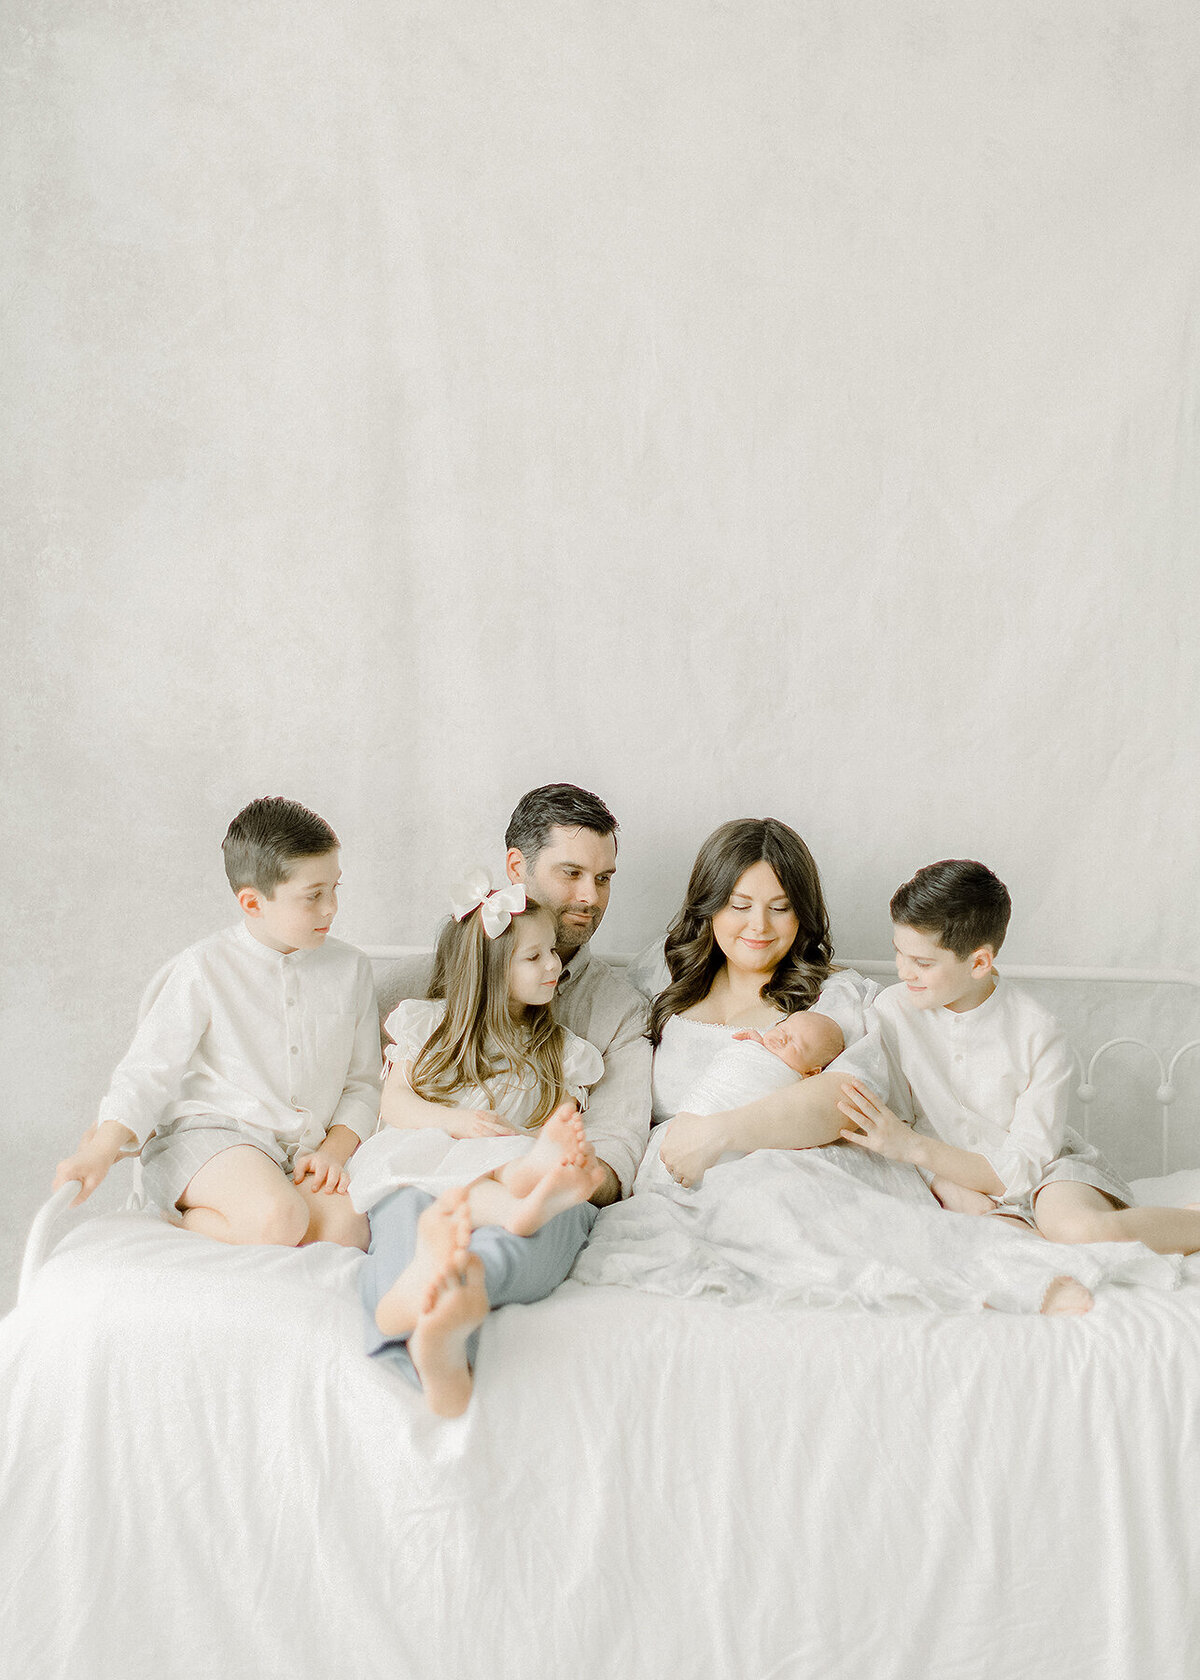 Beautiful Dallas TX family sitting on a bed together in a DFW photography studio while they are leaning in and as the siblings are looking at their newborn baby brother.